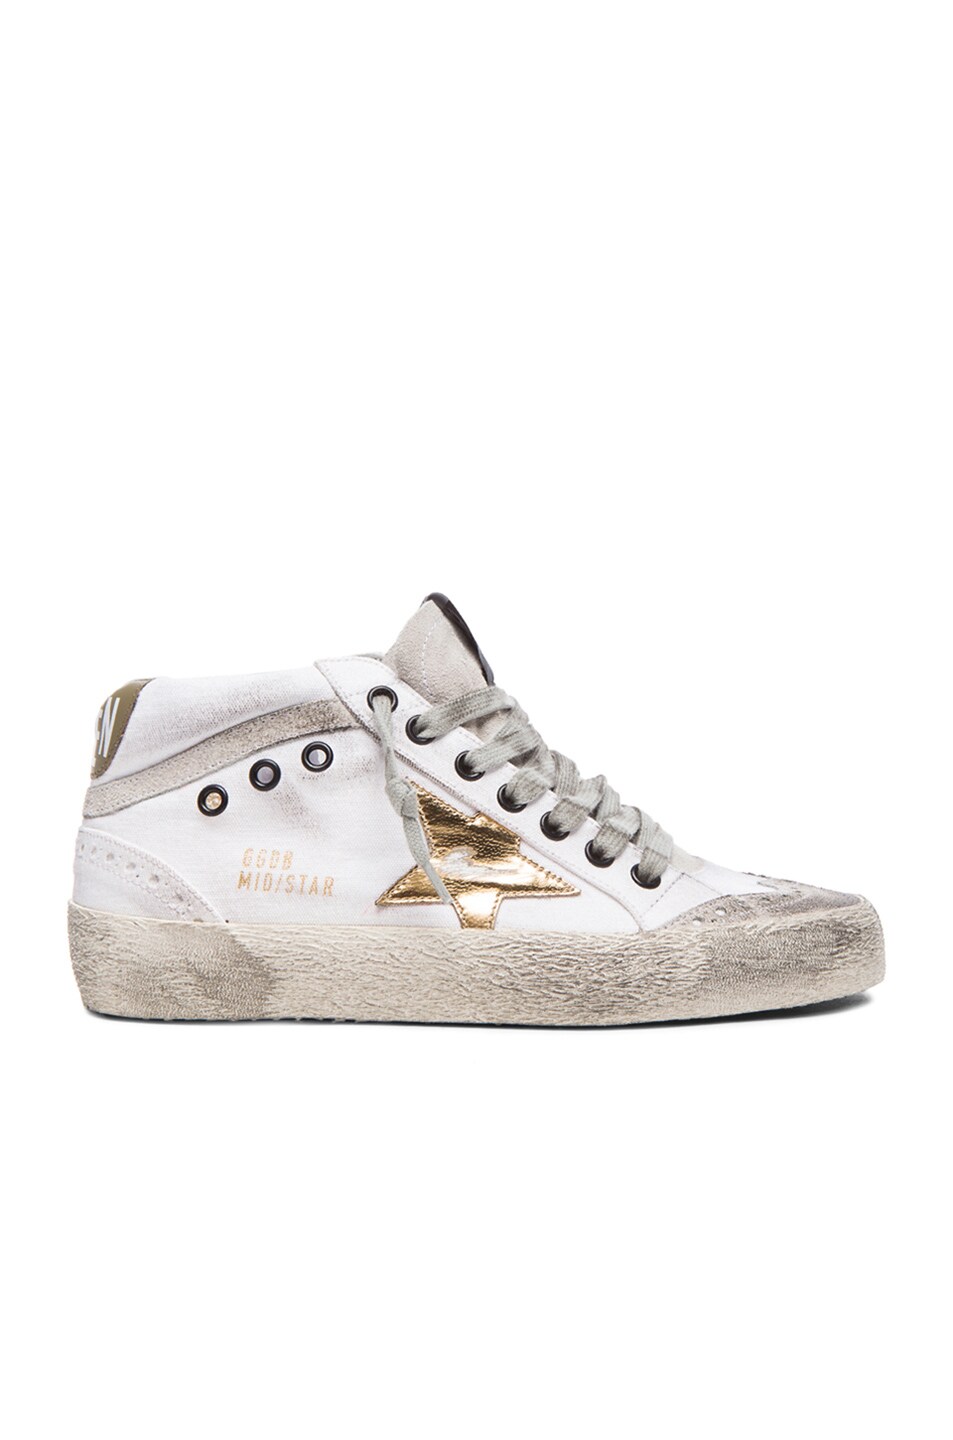 Image 1 of Golden Goose Mid Star in Gold & White